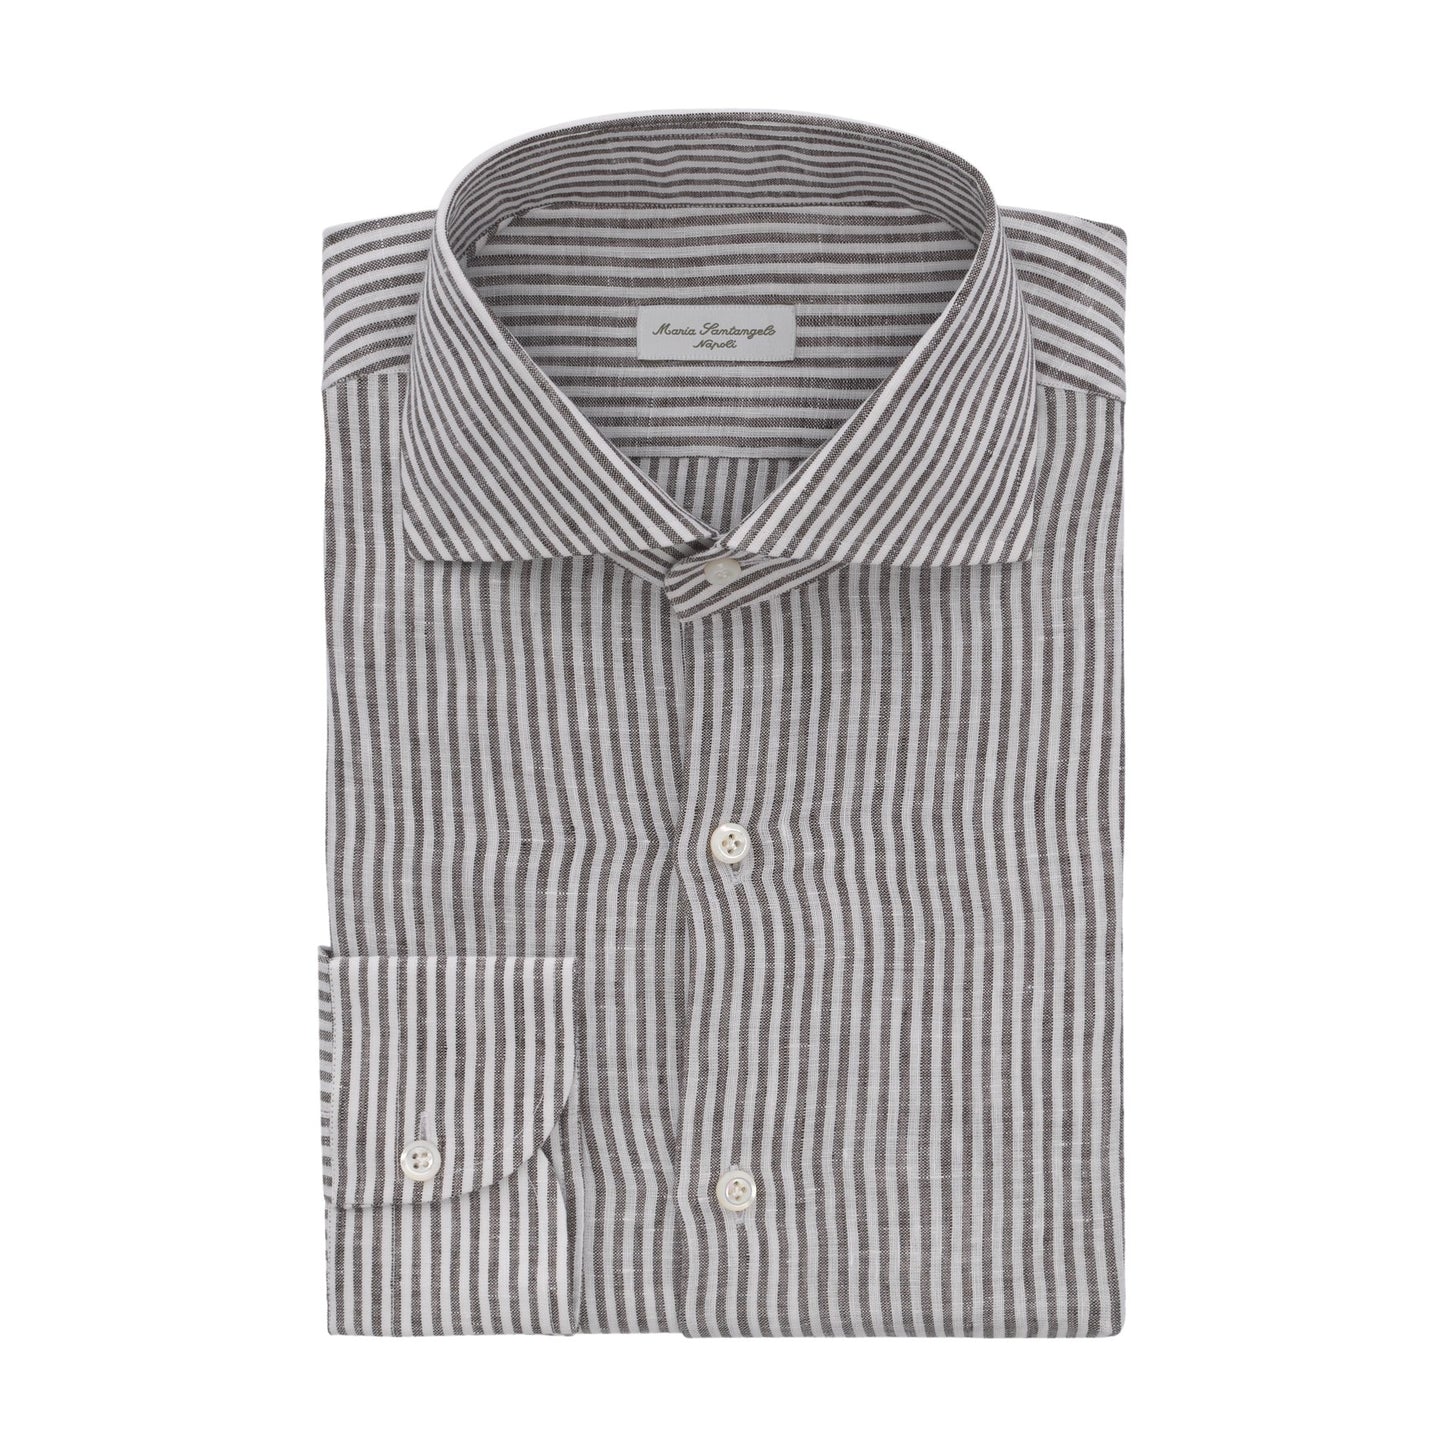 Maria Santangelo Striped Linen Shirt in Grey and White - SARTALE